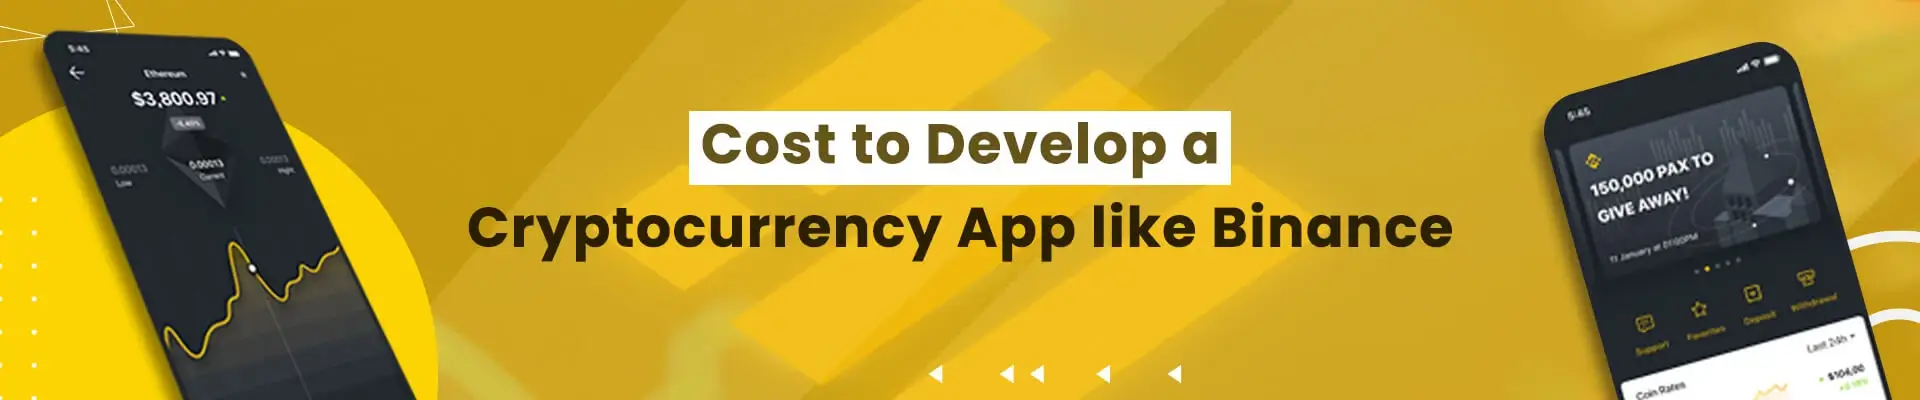 How Much Does It Cost to Develop a Cryptocurrency App like Binance? [2021]